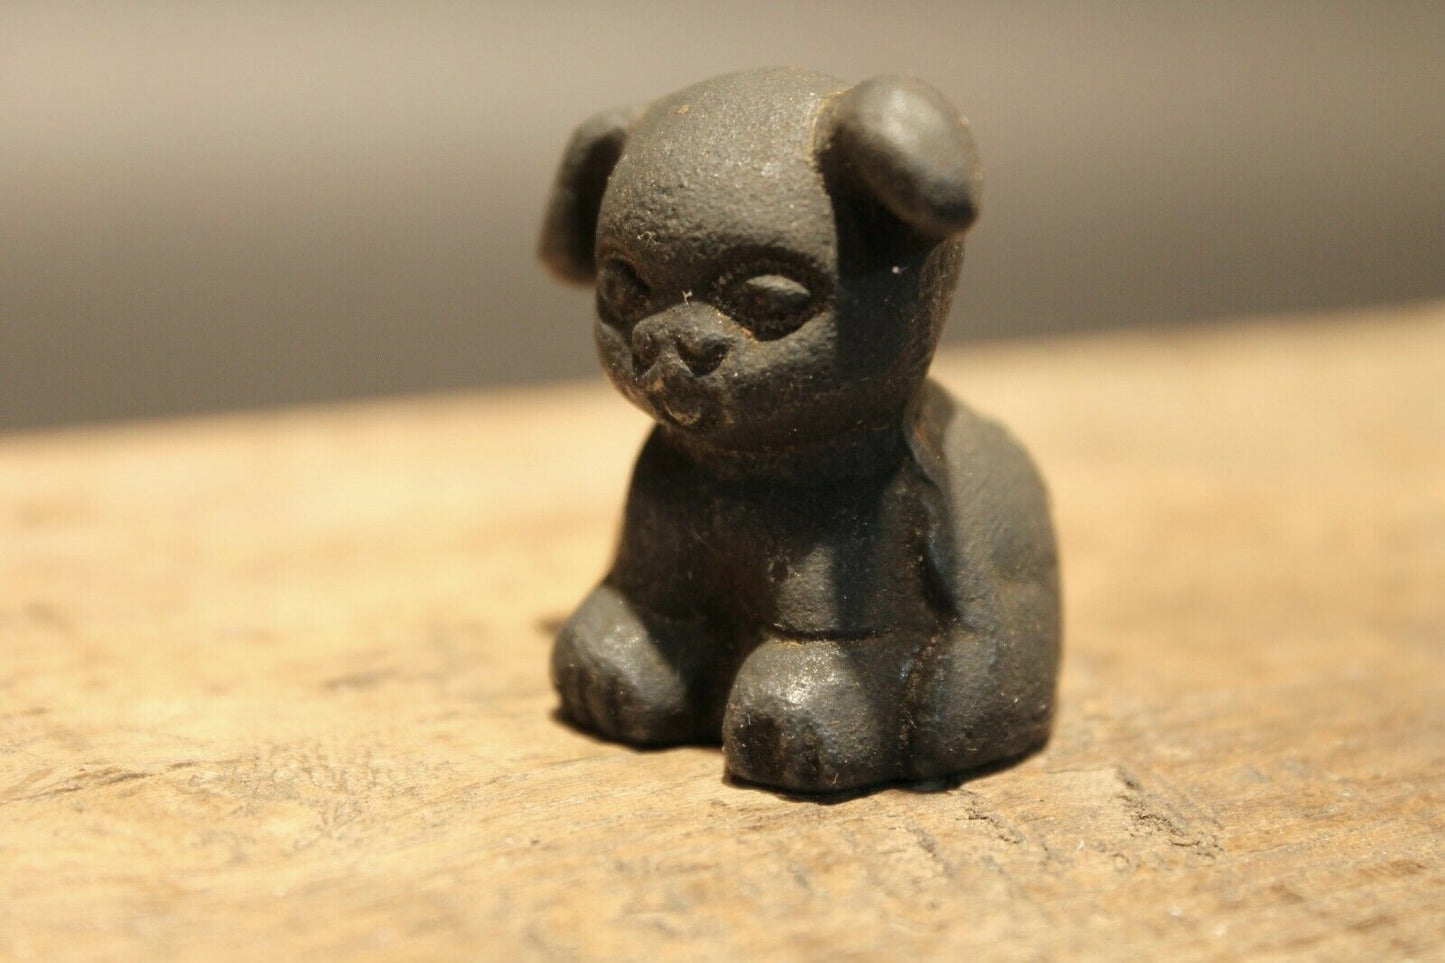 Vintage Antique Style Miniature Cast Iron "Griswold Pup" Dog - Early Home Decor